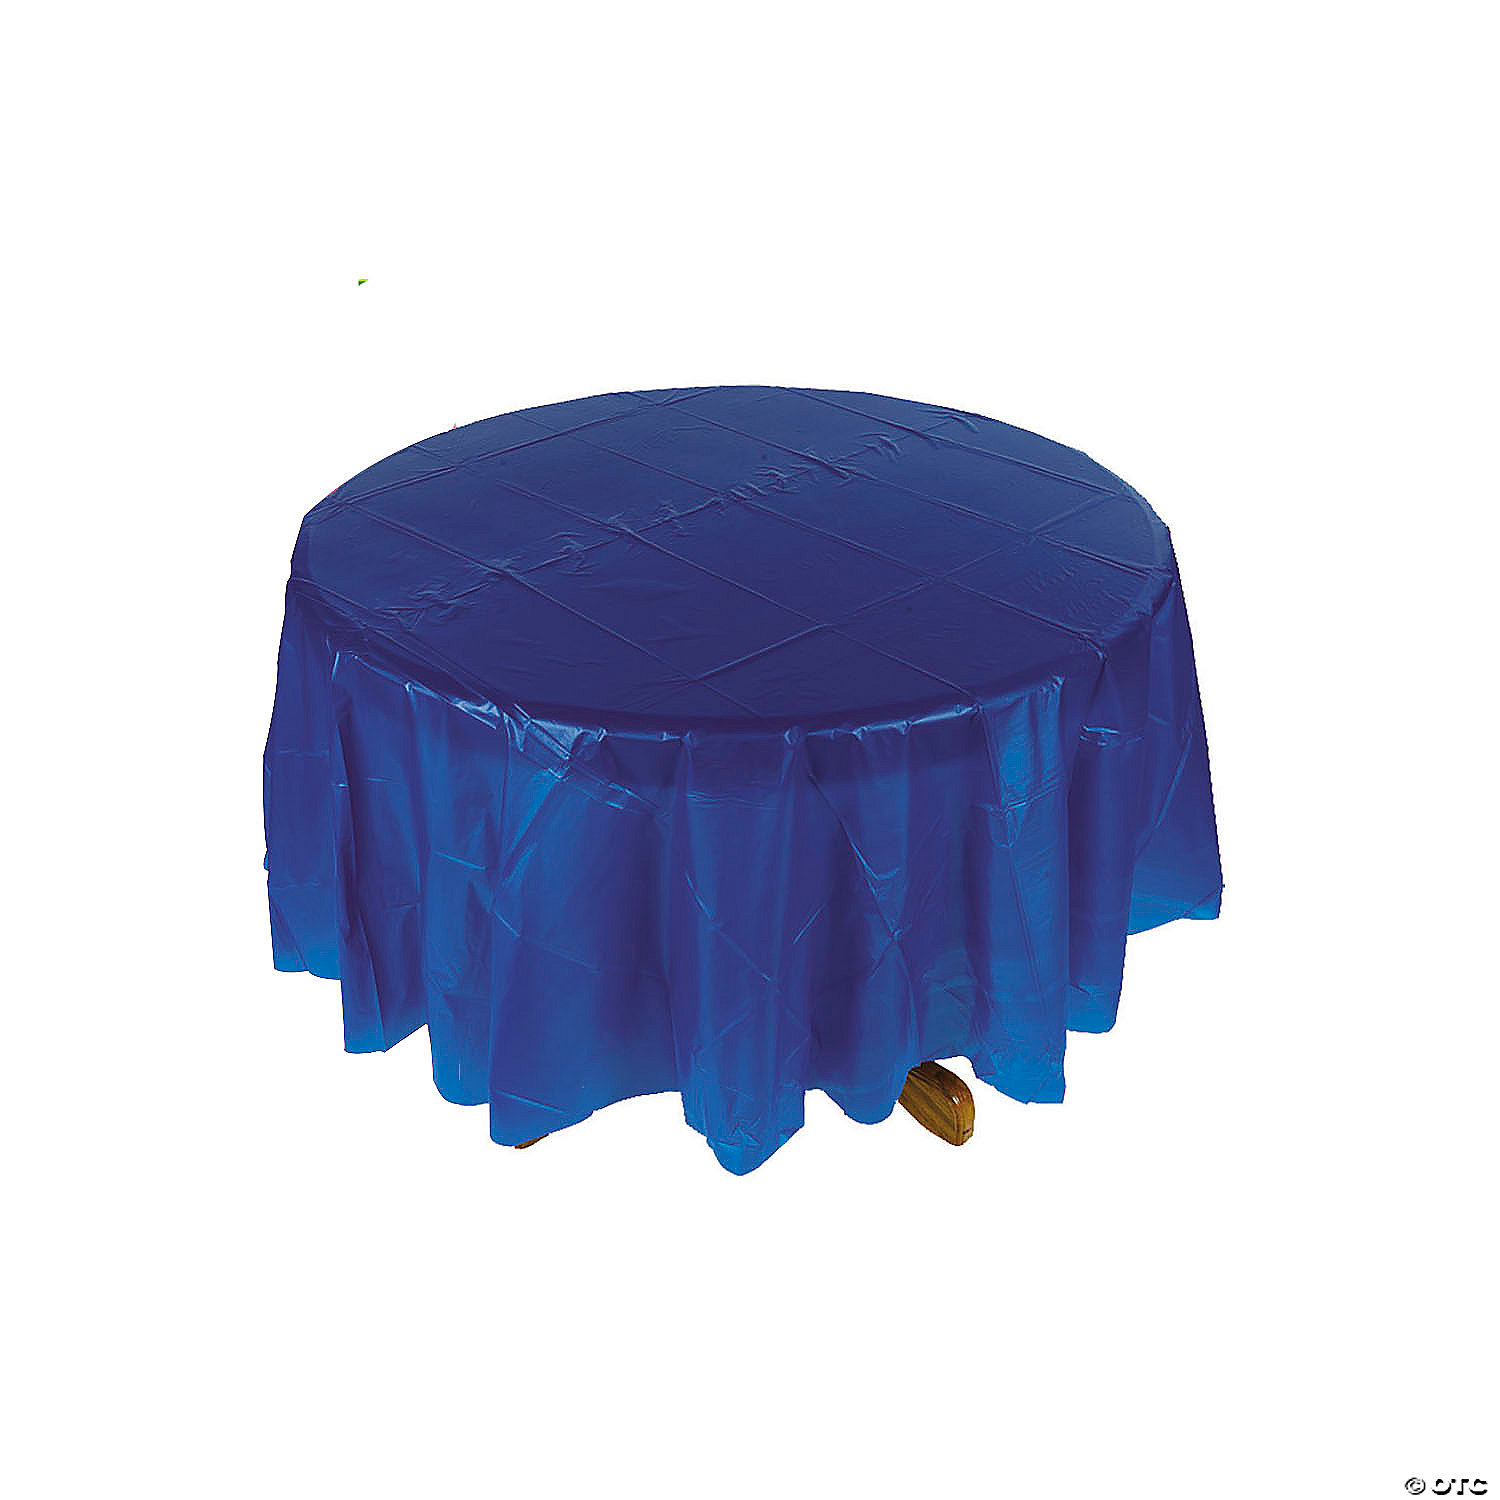 Round Plastic Tablecloth Oriental Trading, 60 Inch Round Plastic Tablecloths With Elastic